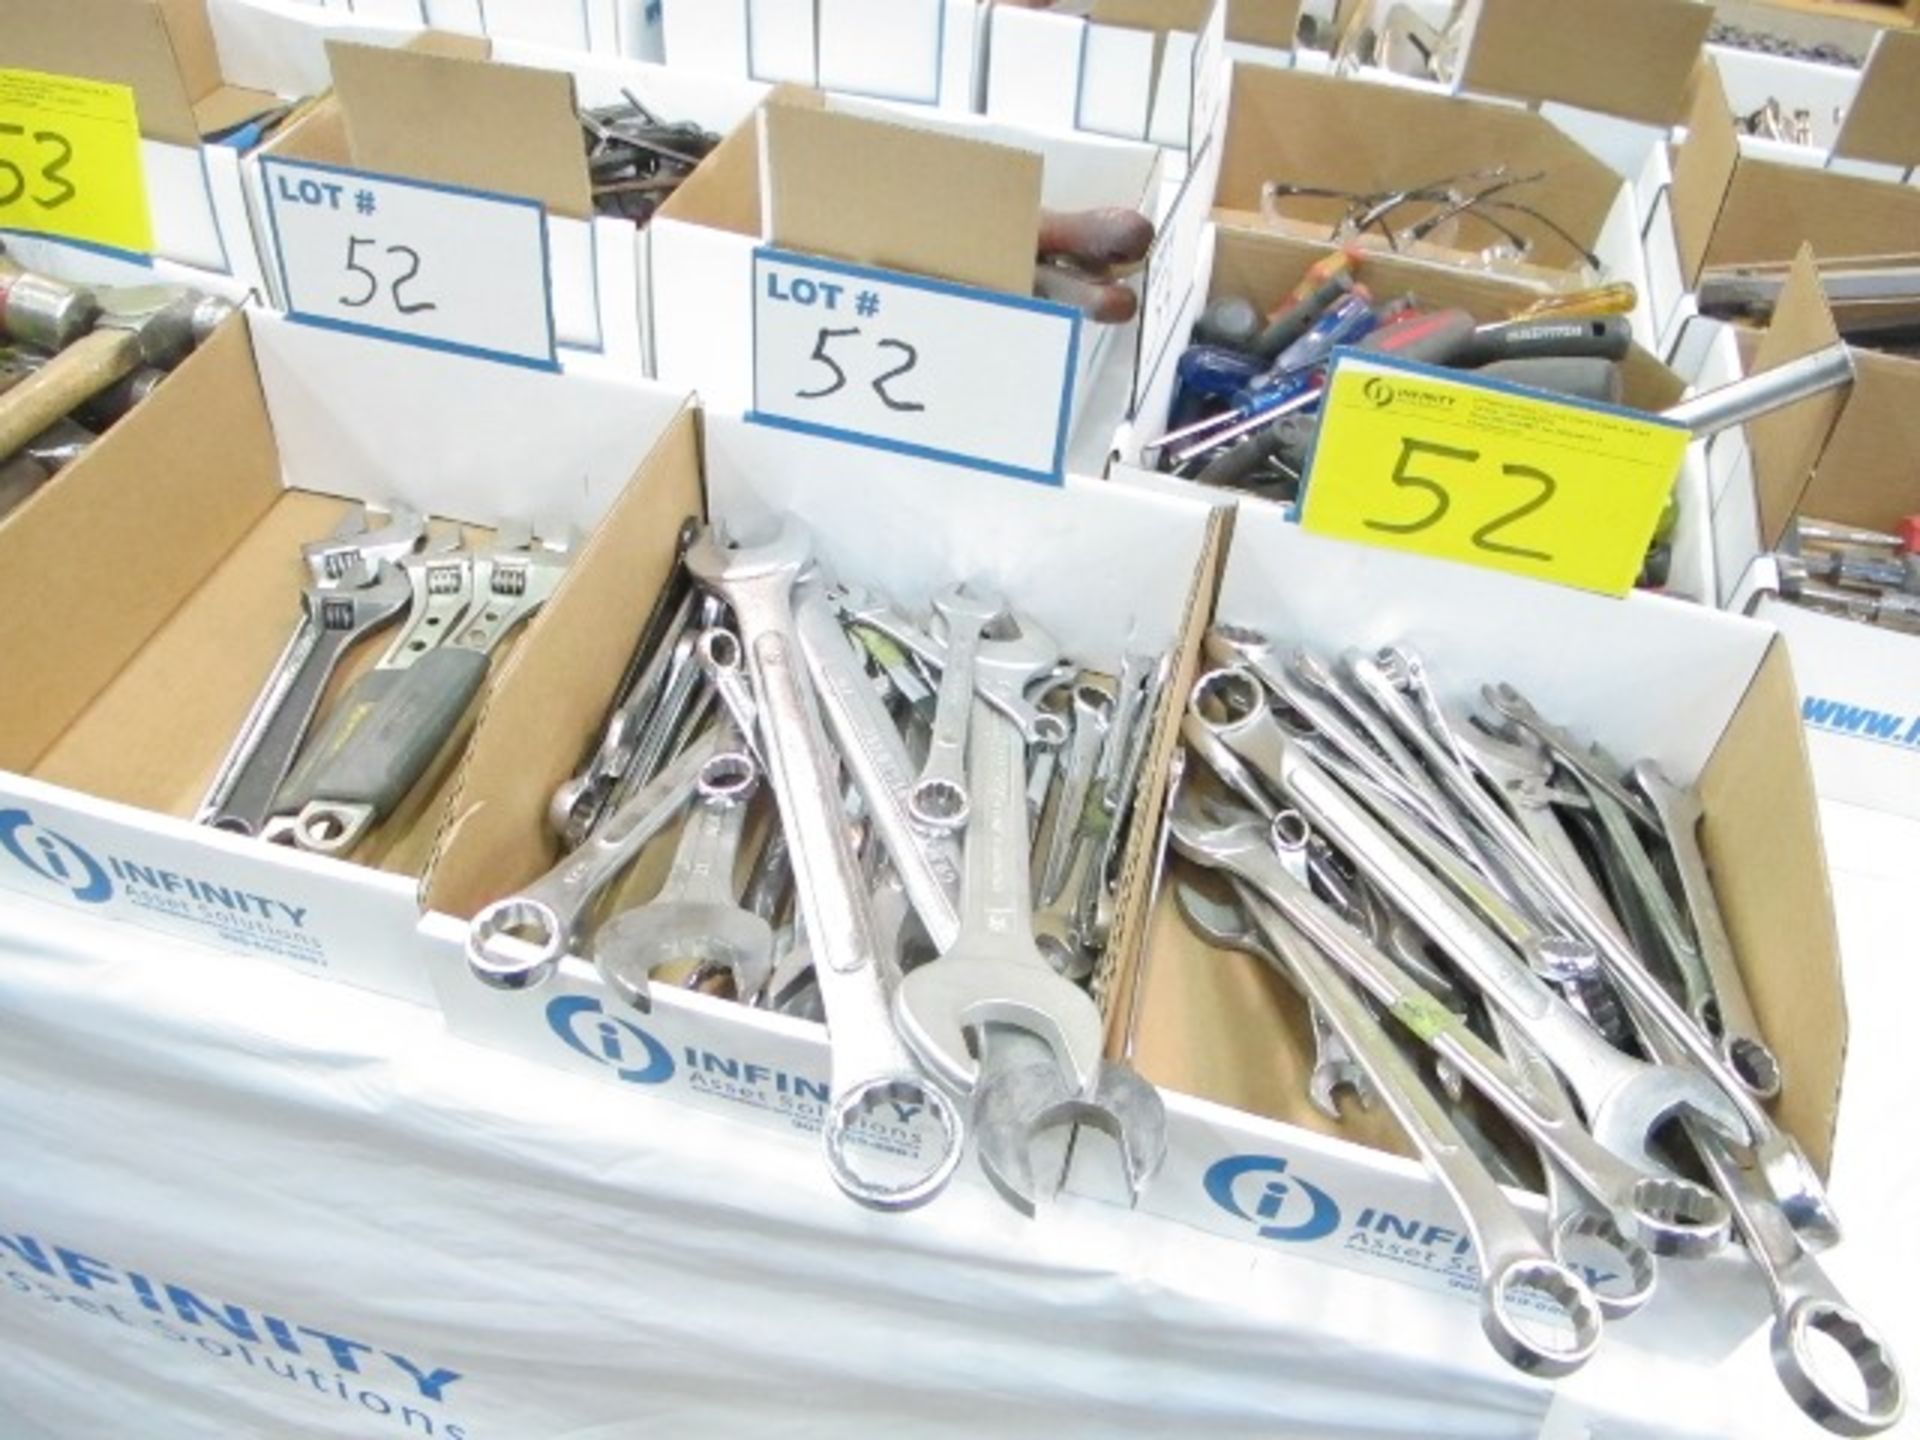 QUANTITY OF WRENCHES AND ADJUSTABLE WRENCHES (3 BOXES)